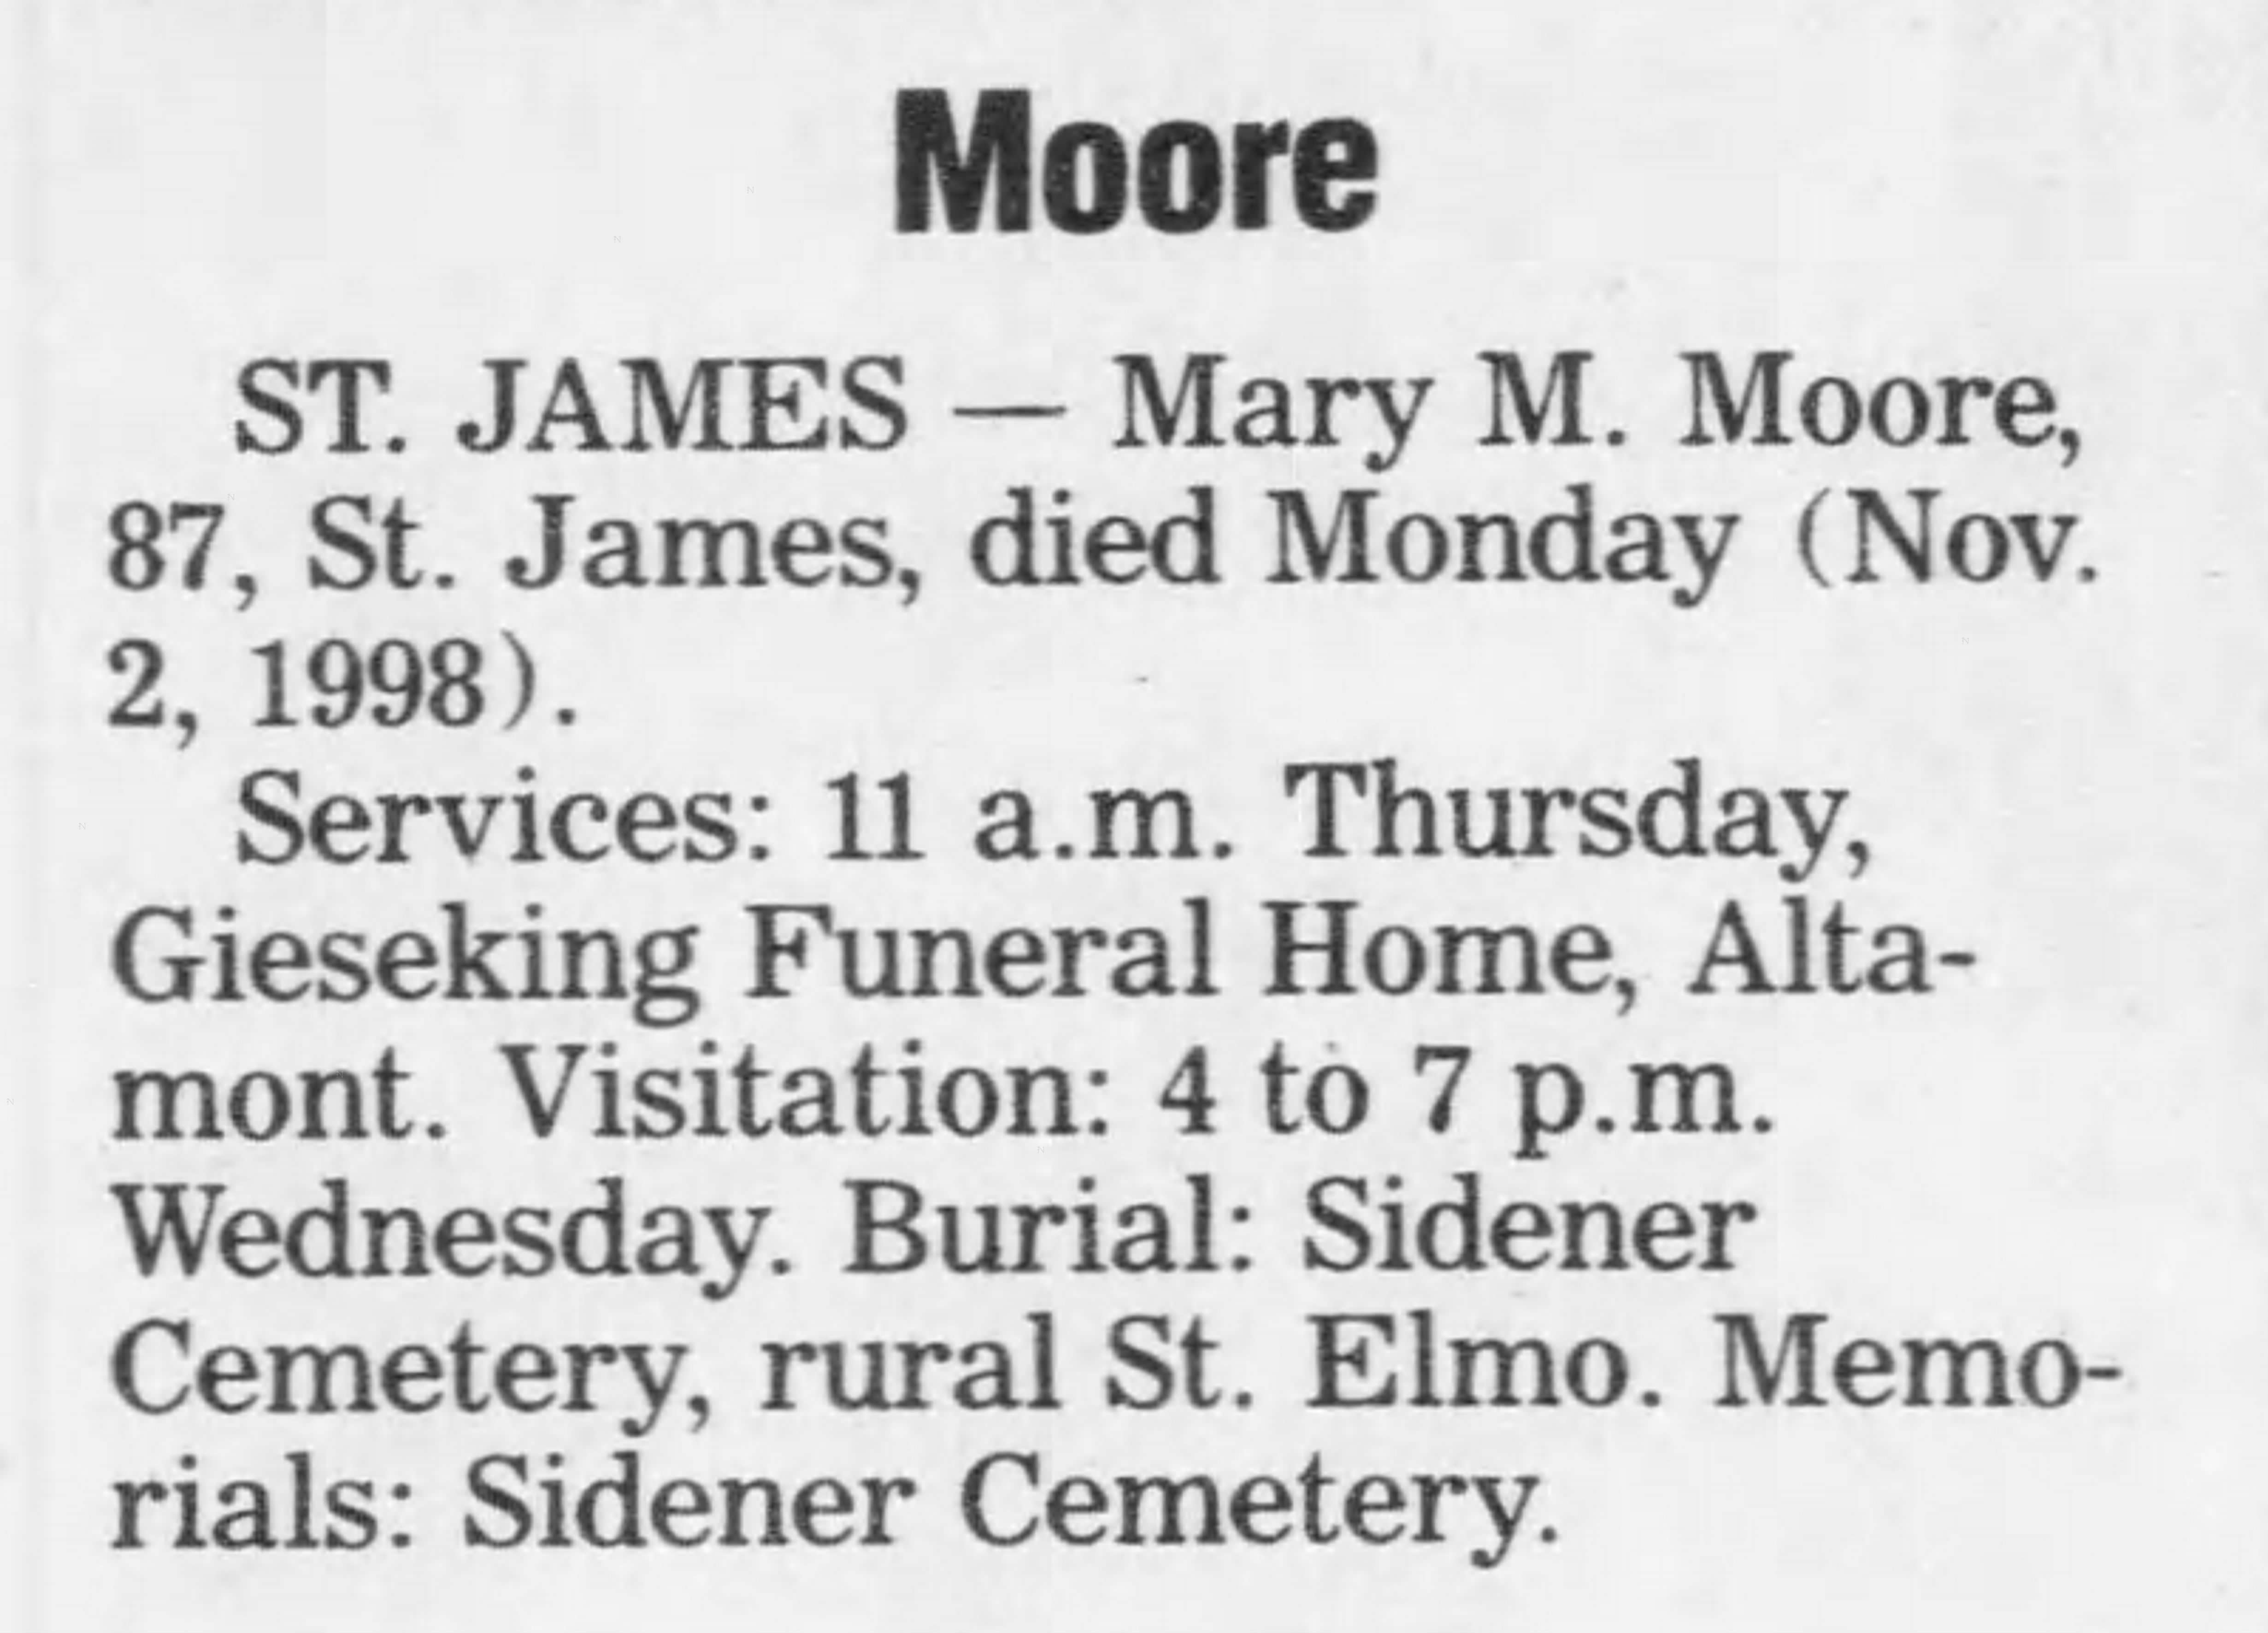 OBITUARY: MOORE, Mary M. (maiden name COOK)